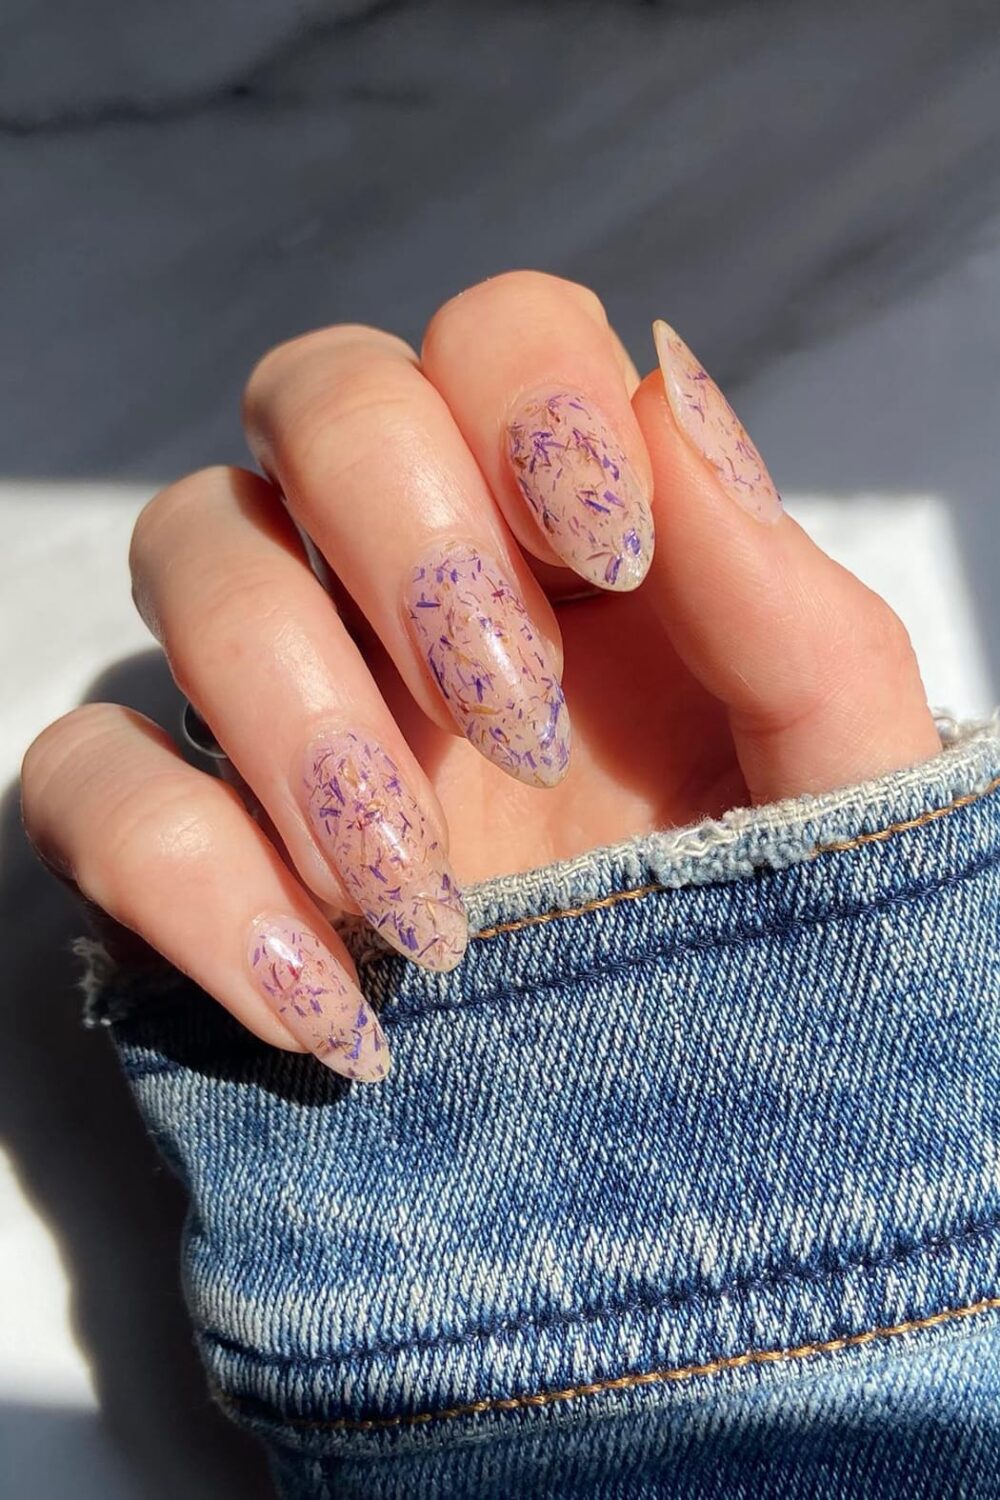 Natural dried flower nails